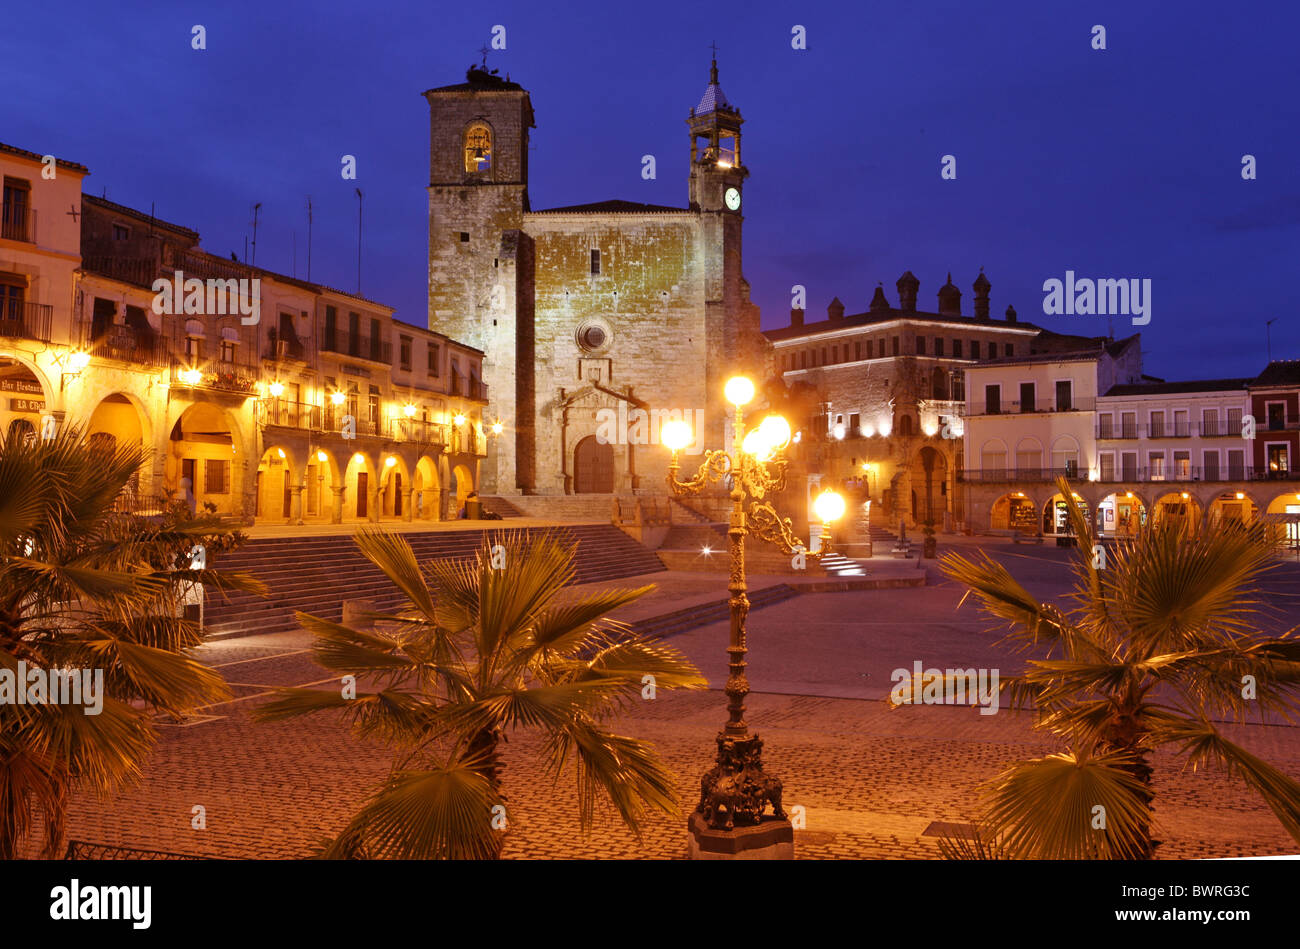 Spain Europe Trujillo city Province of Caceres Extremadura Region Plaza Mayor Old town Square Lanterns Palm t Stock Photo